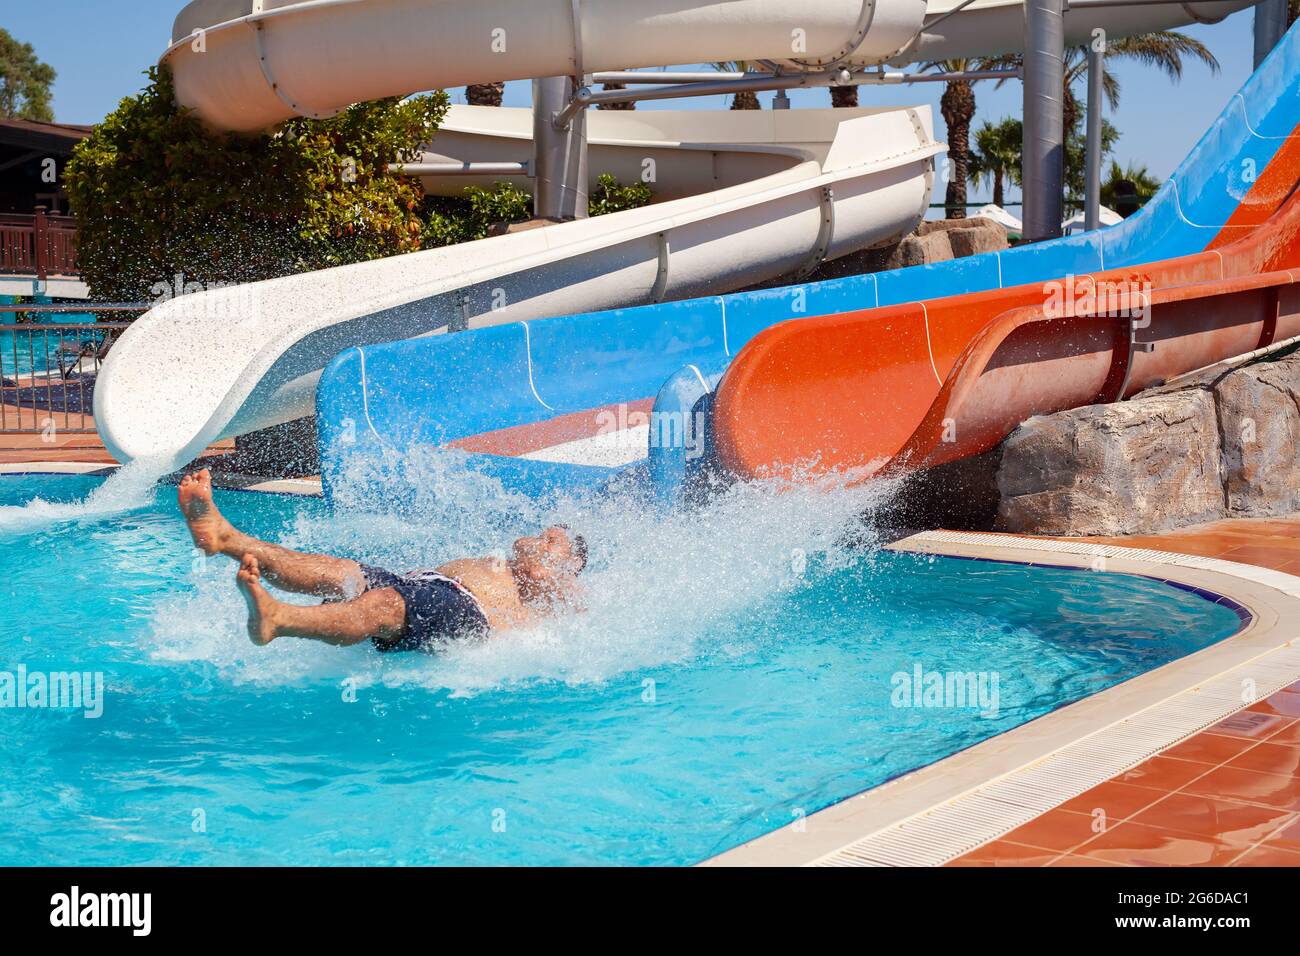 Antalya, Turkey-June 30, 2021: Man going down on water slide and entering swimming pool with big splash at aqua park in summer holiday. Stock Photo